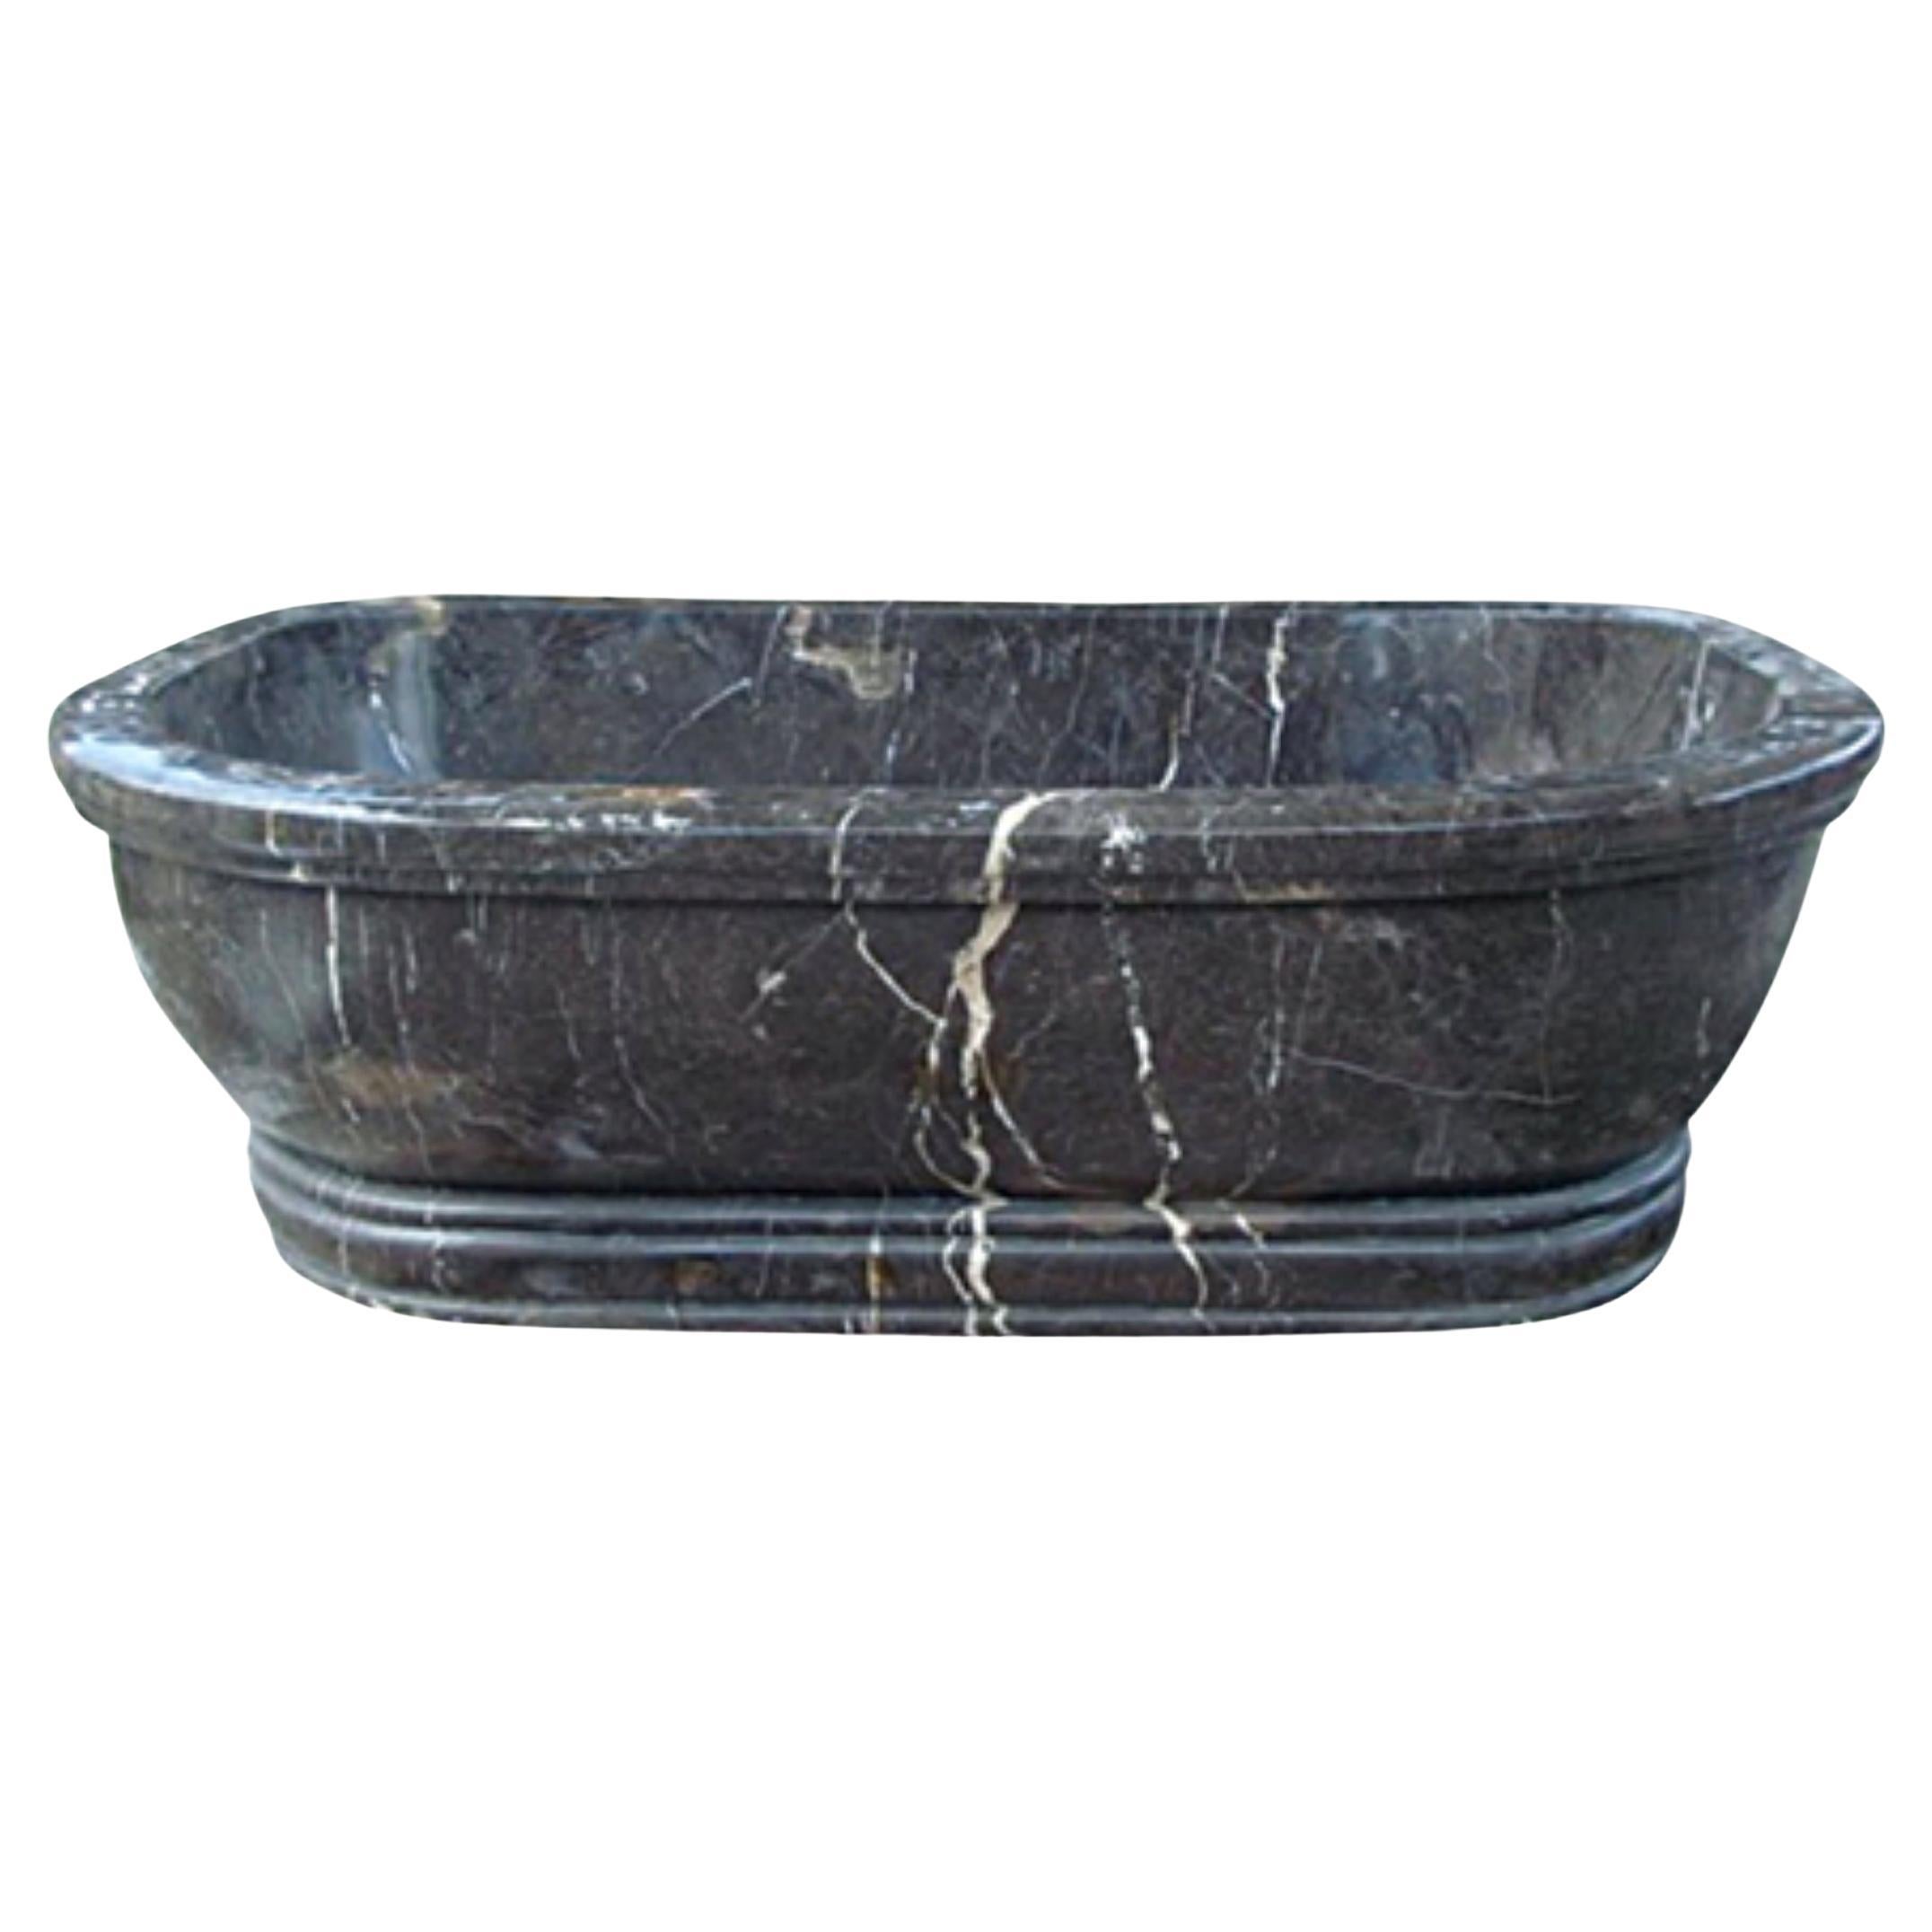 Classical Roman style bathtubs
Solid one piece manufacture
Designs in various marbles with custom sizing and design options available
Small or larger projects undertaken
We can custom make to your design 
Price is guide only.
 